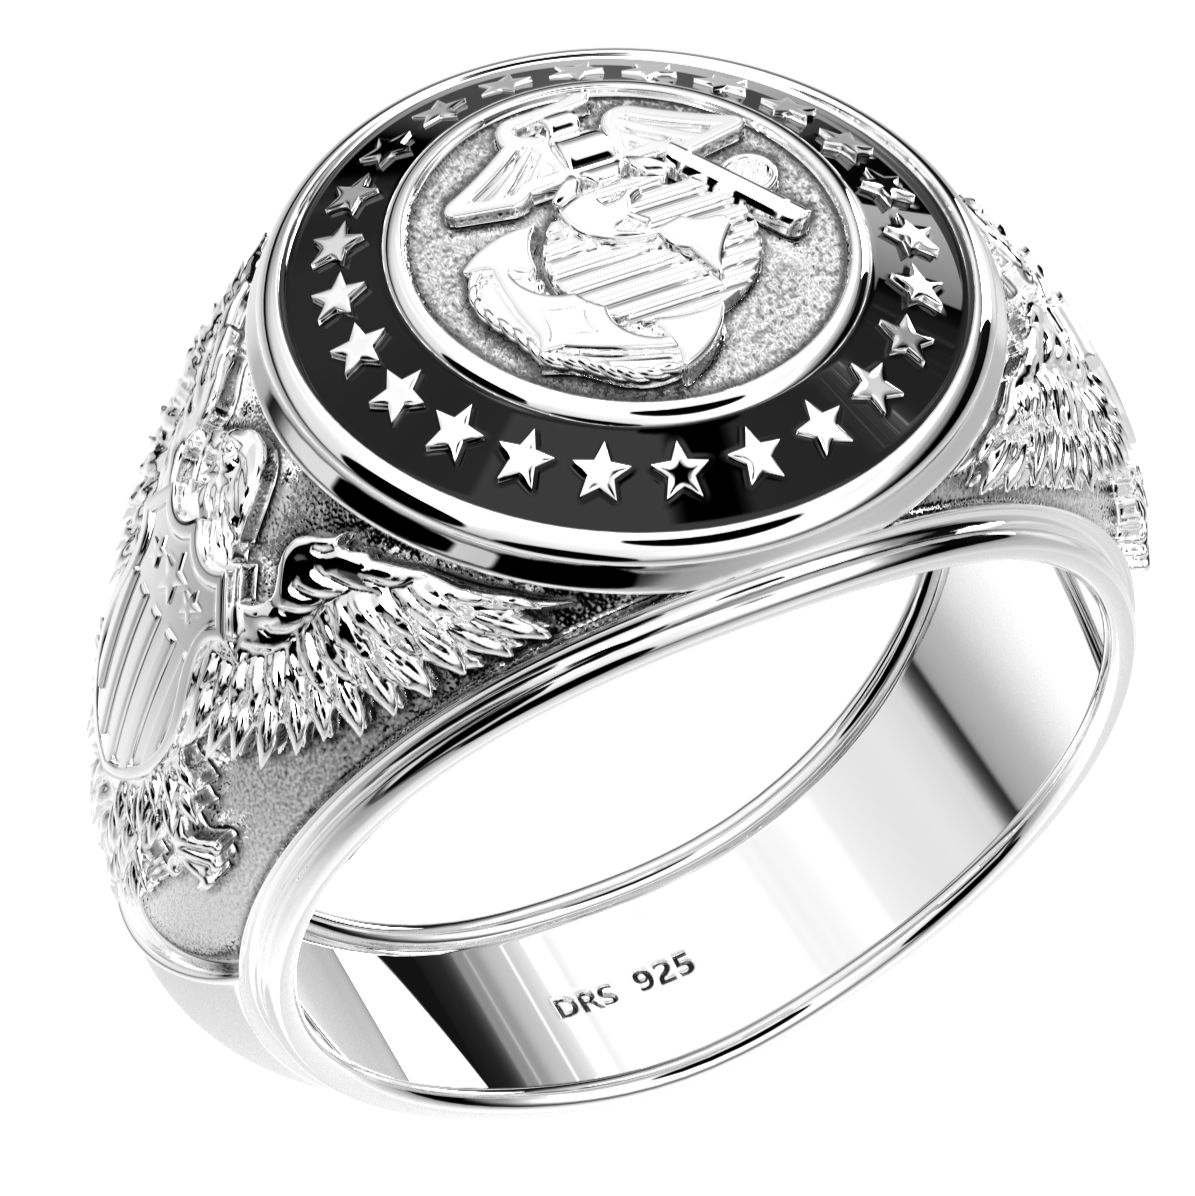 Men's 925 Sterling Silver US Marine Corps Military Solid Back Ring